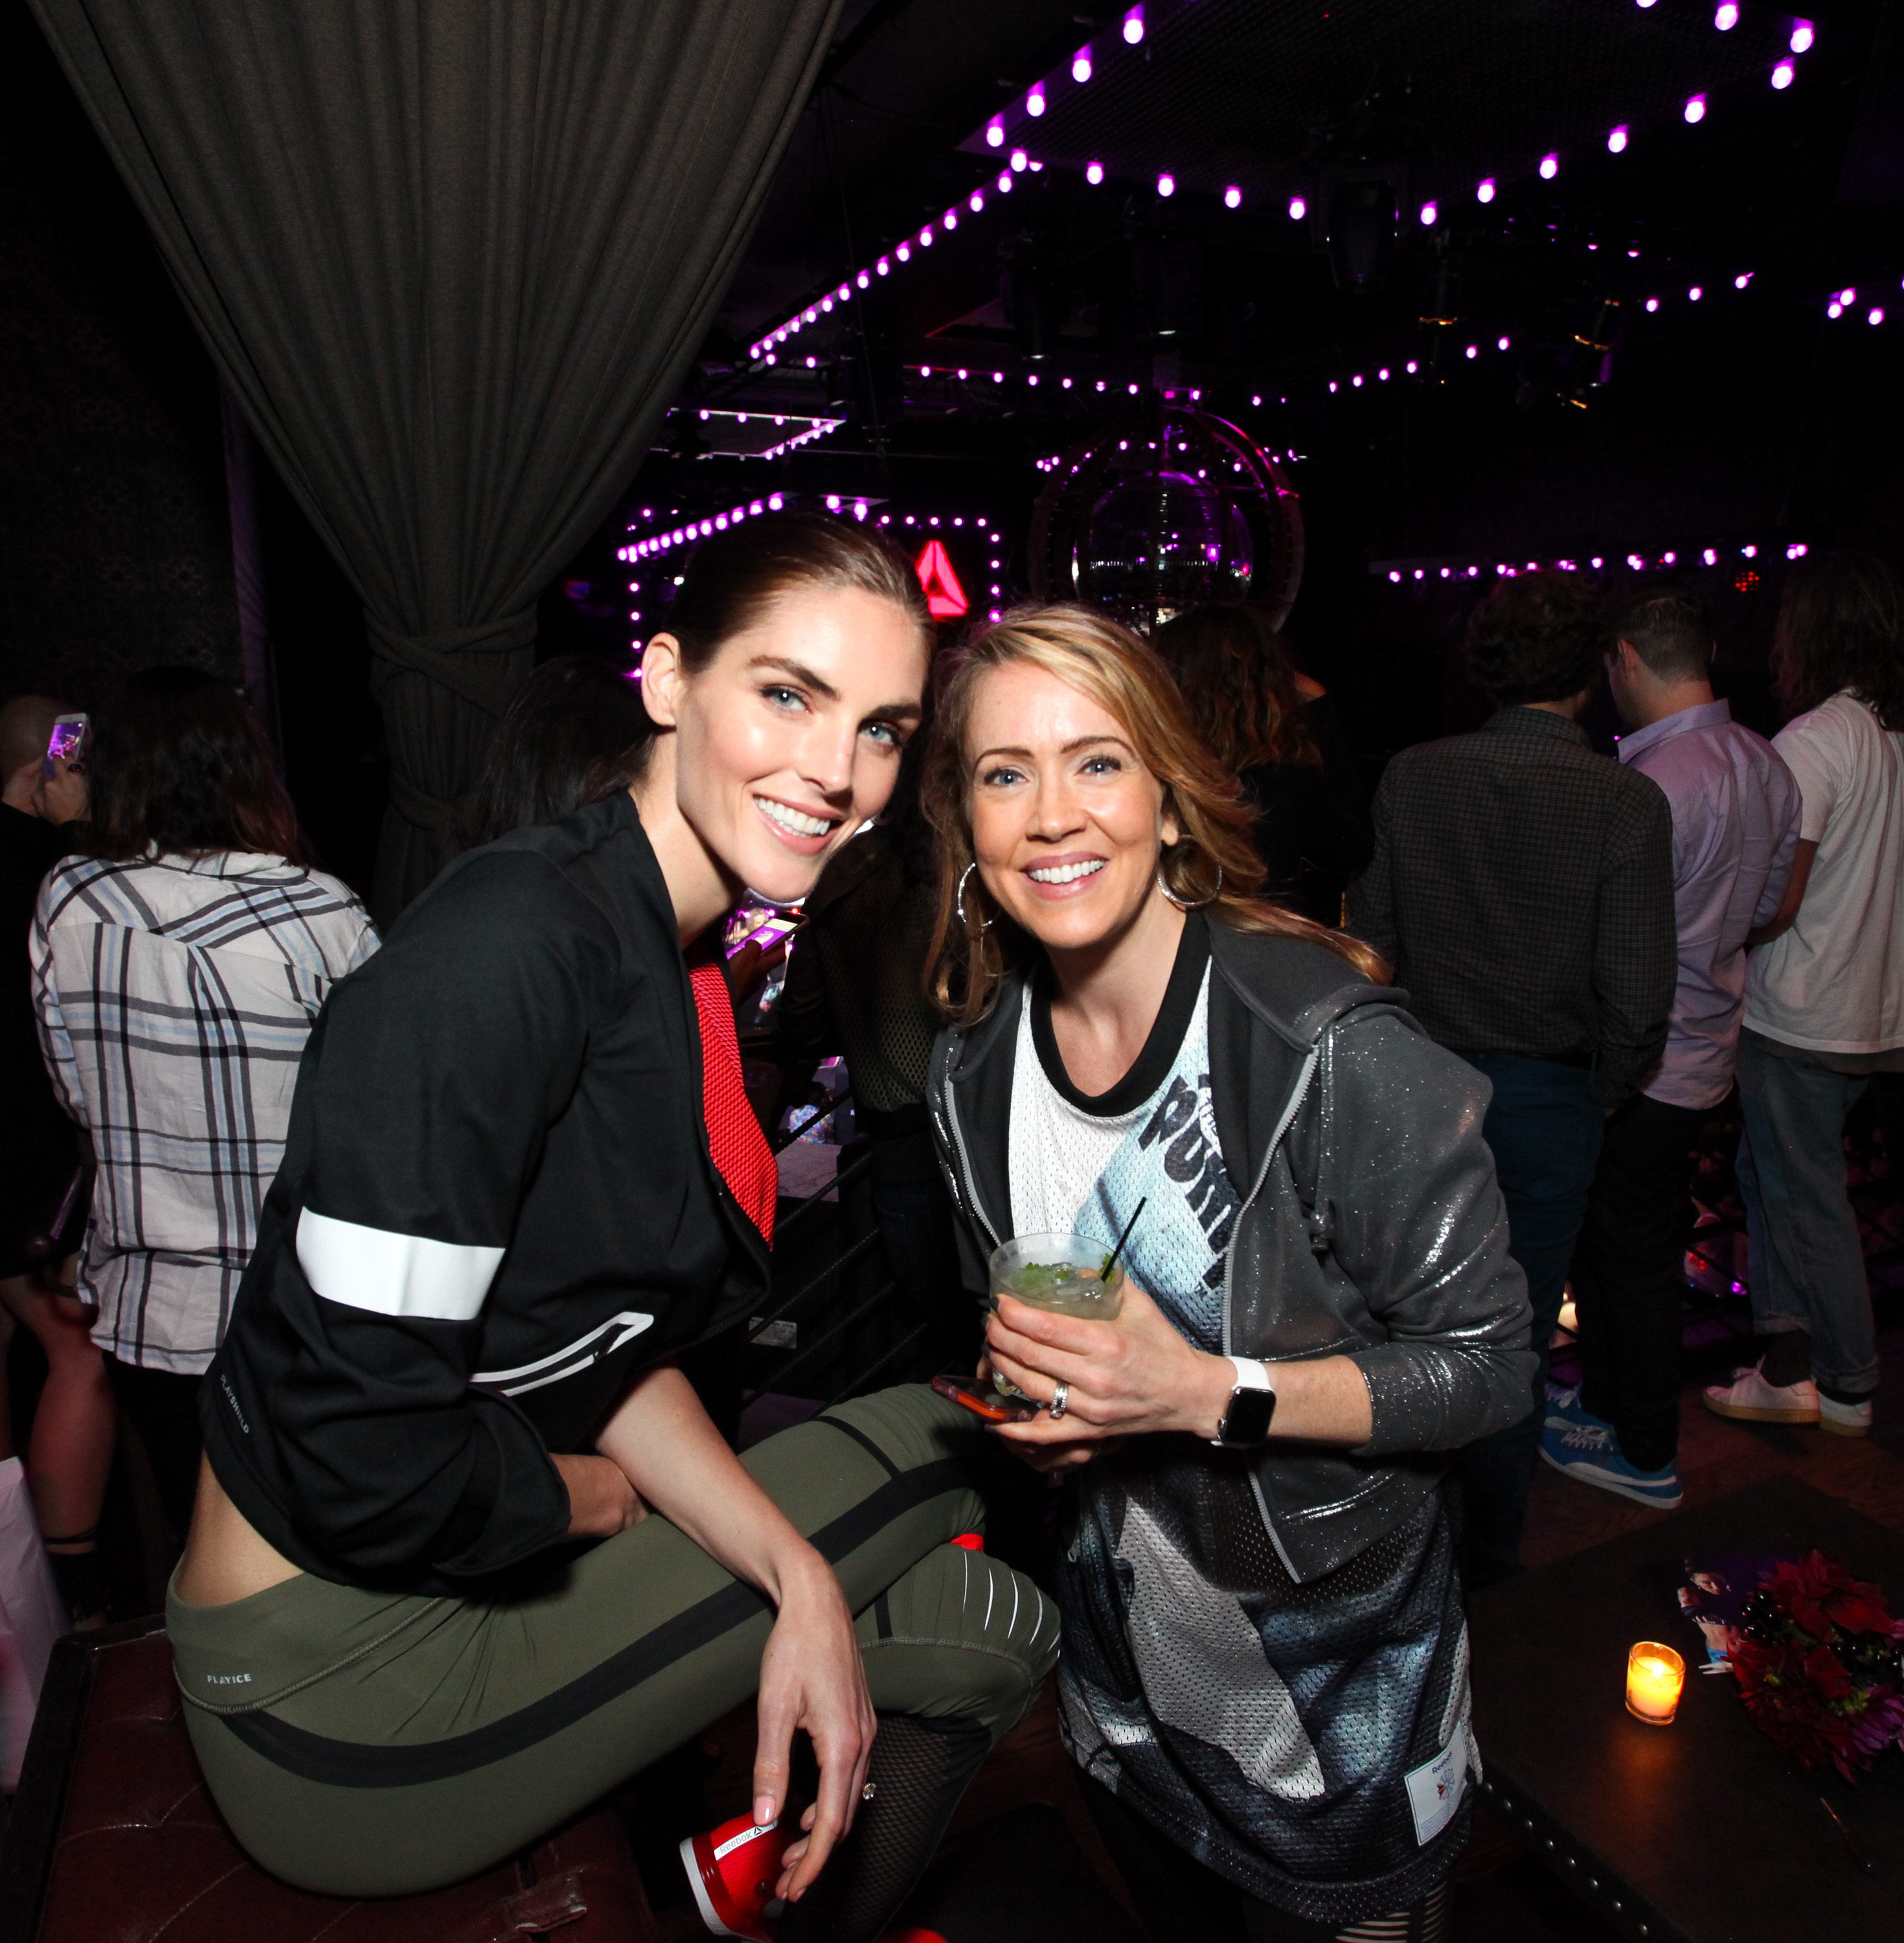 NEW YORK, NY - SEPTEMBER 16: (L-R)Hilary Rhoda and Catherine Marshall attend The Reebok #girlswithgrit Showcase at Marquee on September 16, 2015 in New York City. (Photo by Donald Bowers/Getty Images for Reebok)